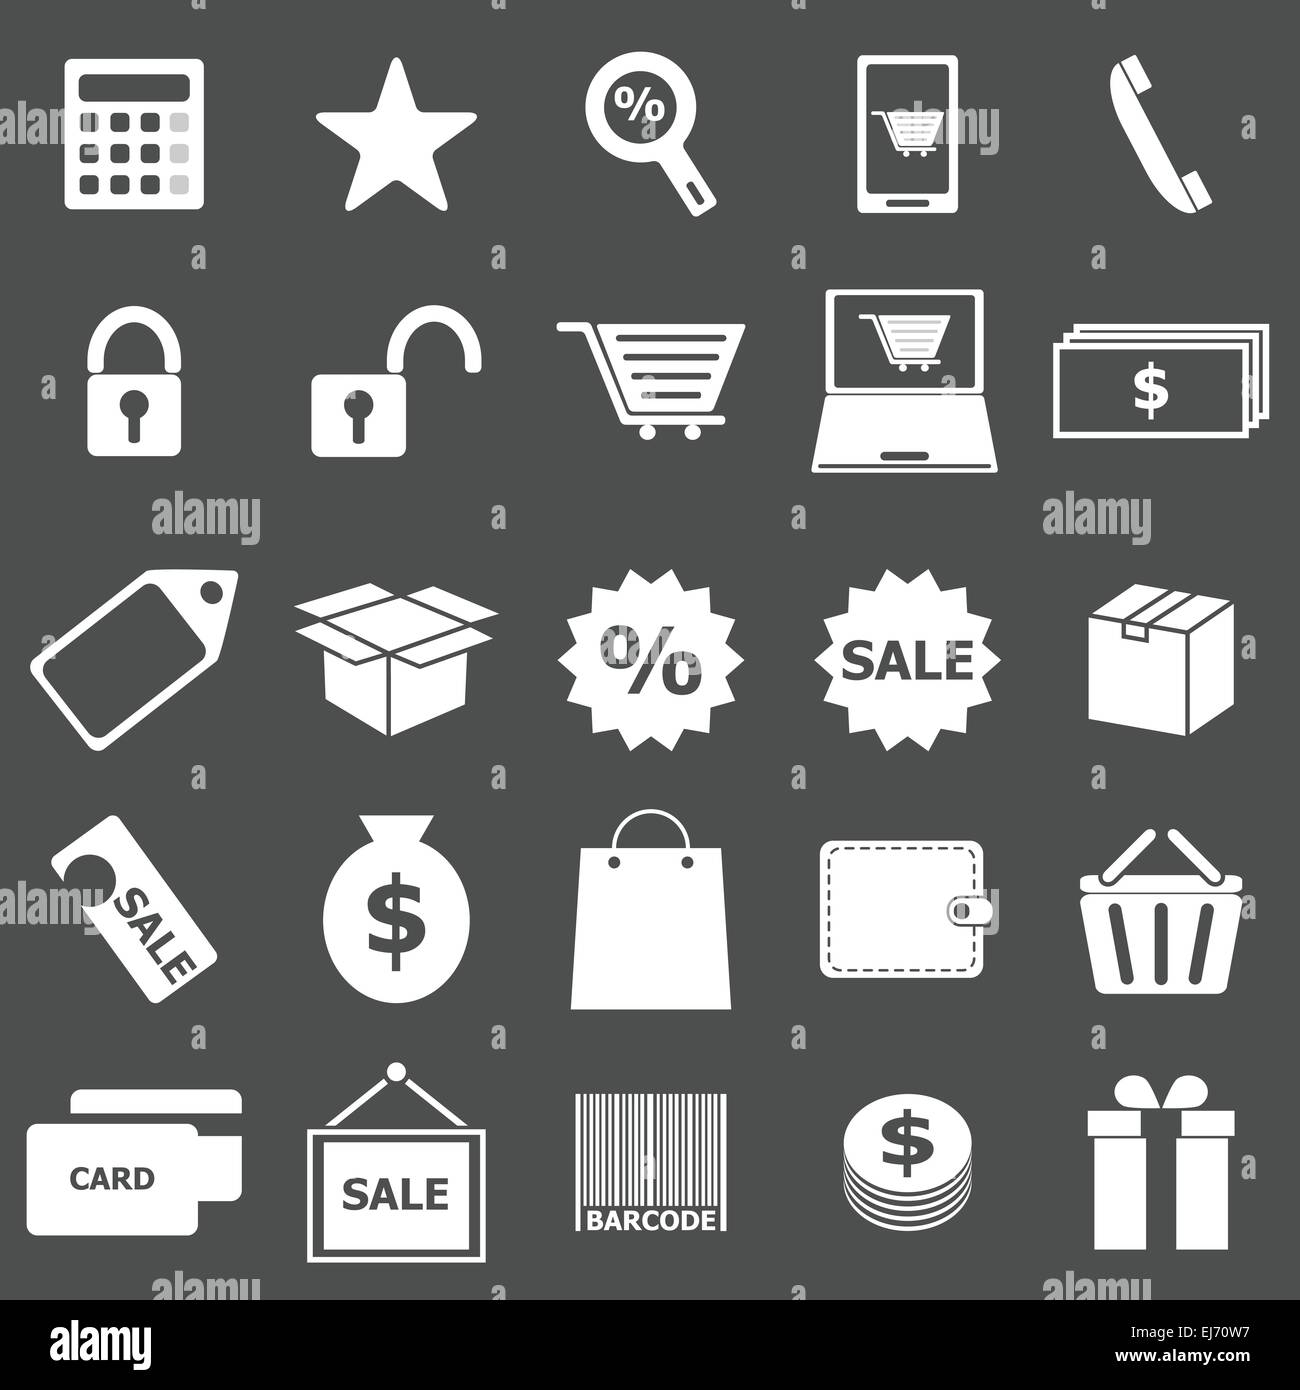 Shopping icons on gray background, stock vector Stock Vector